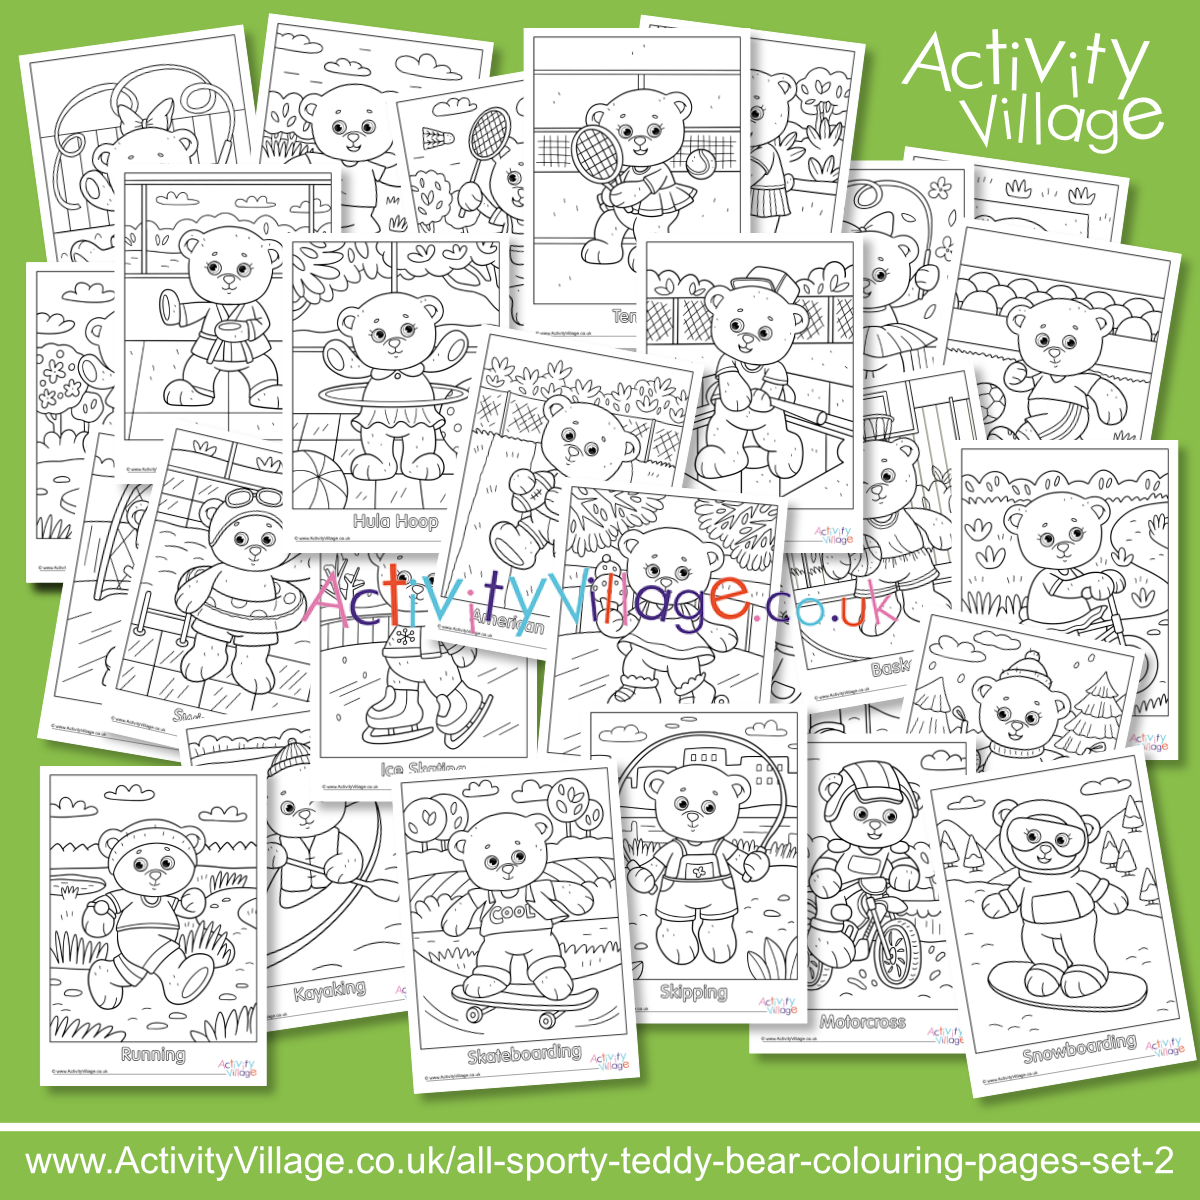 Sporty teddy bear colouring pages set 2